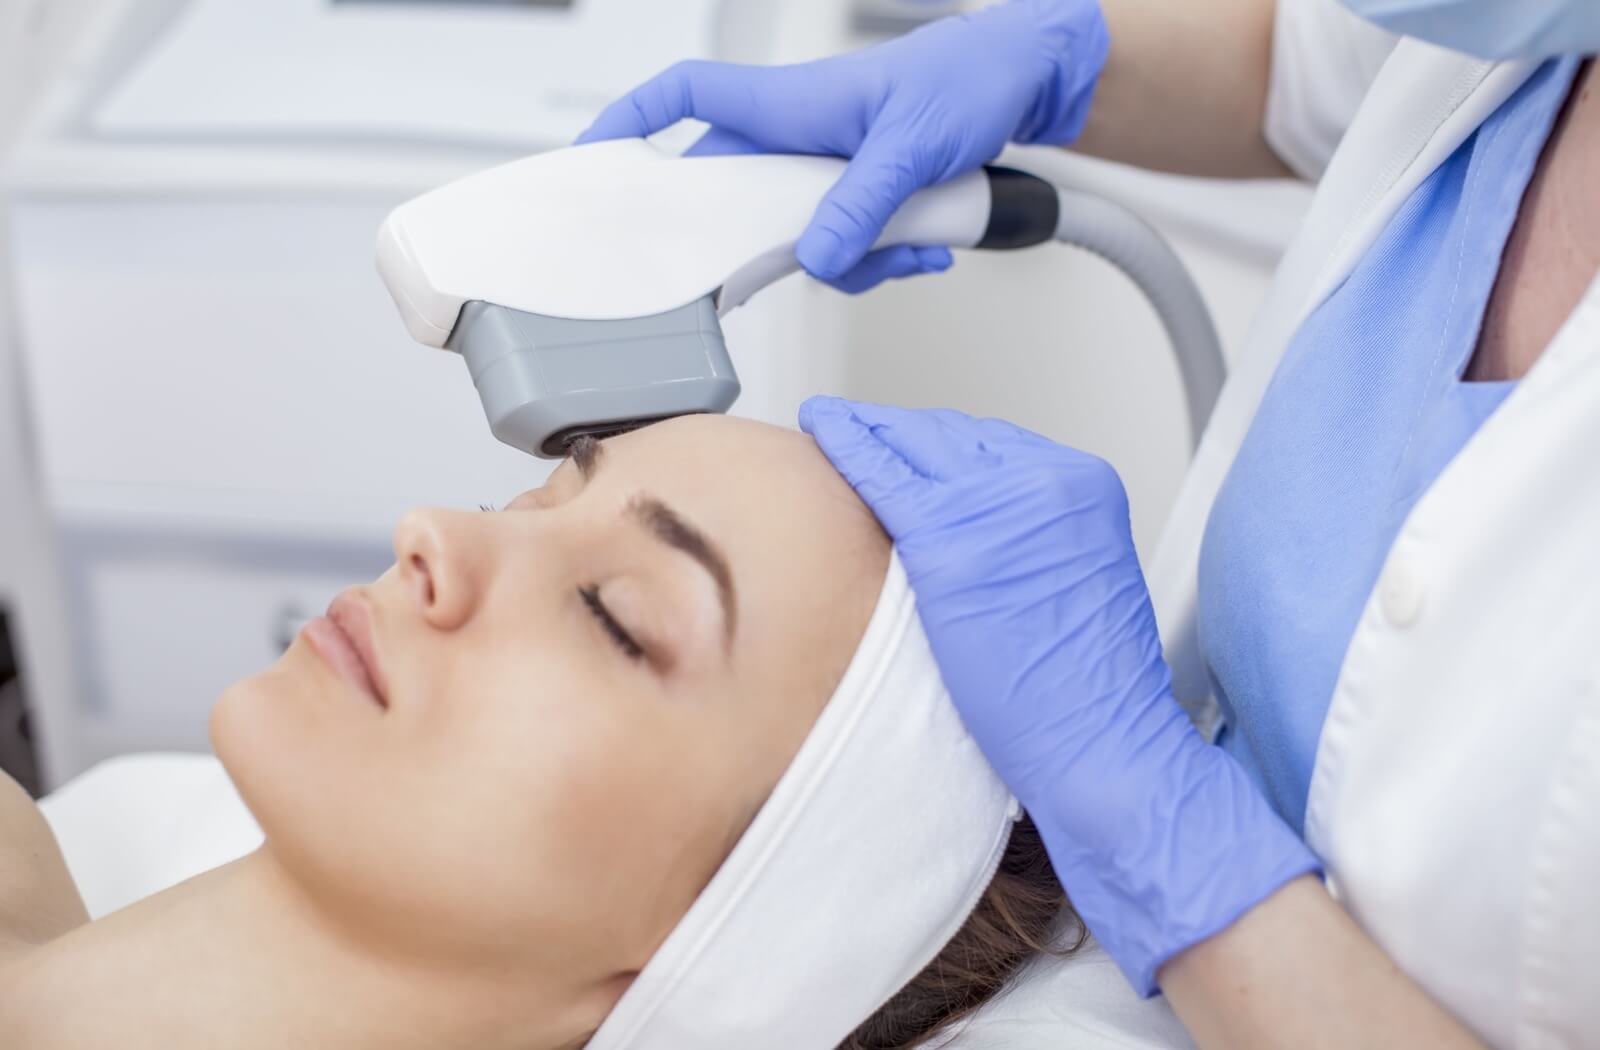 Close-up of a woman receiving an IPL Treatment from an optometrist using a specialized equipment